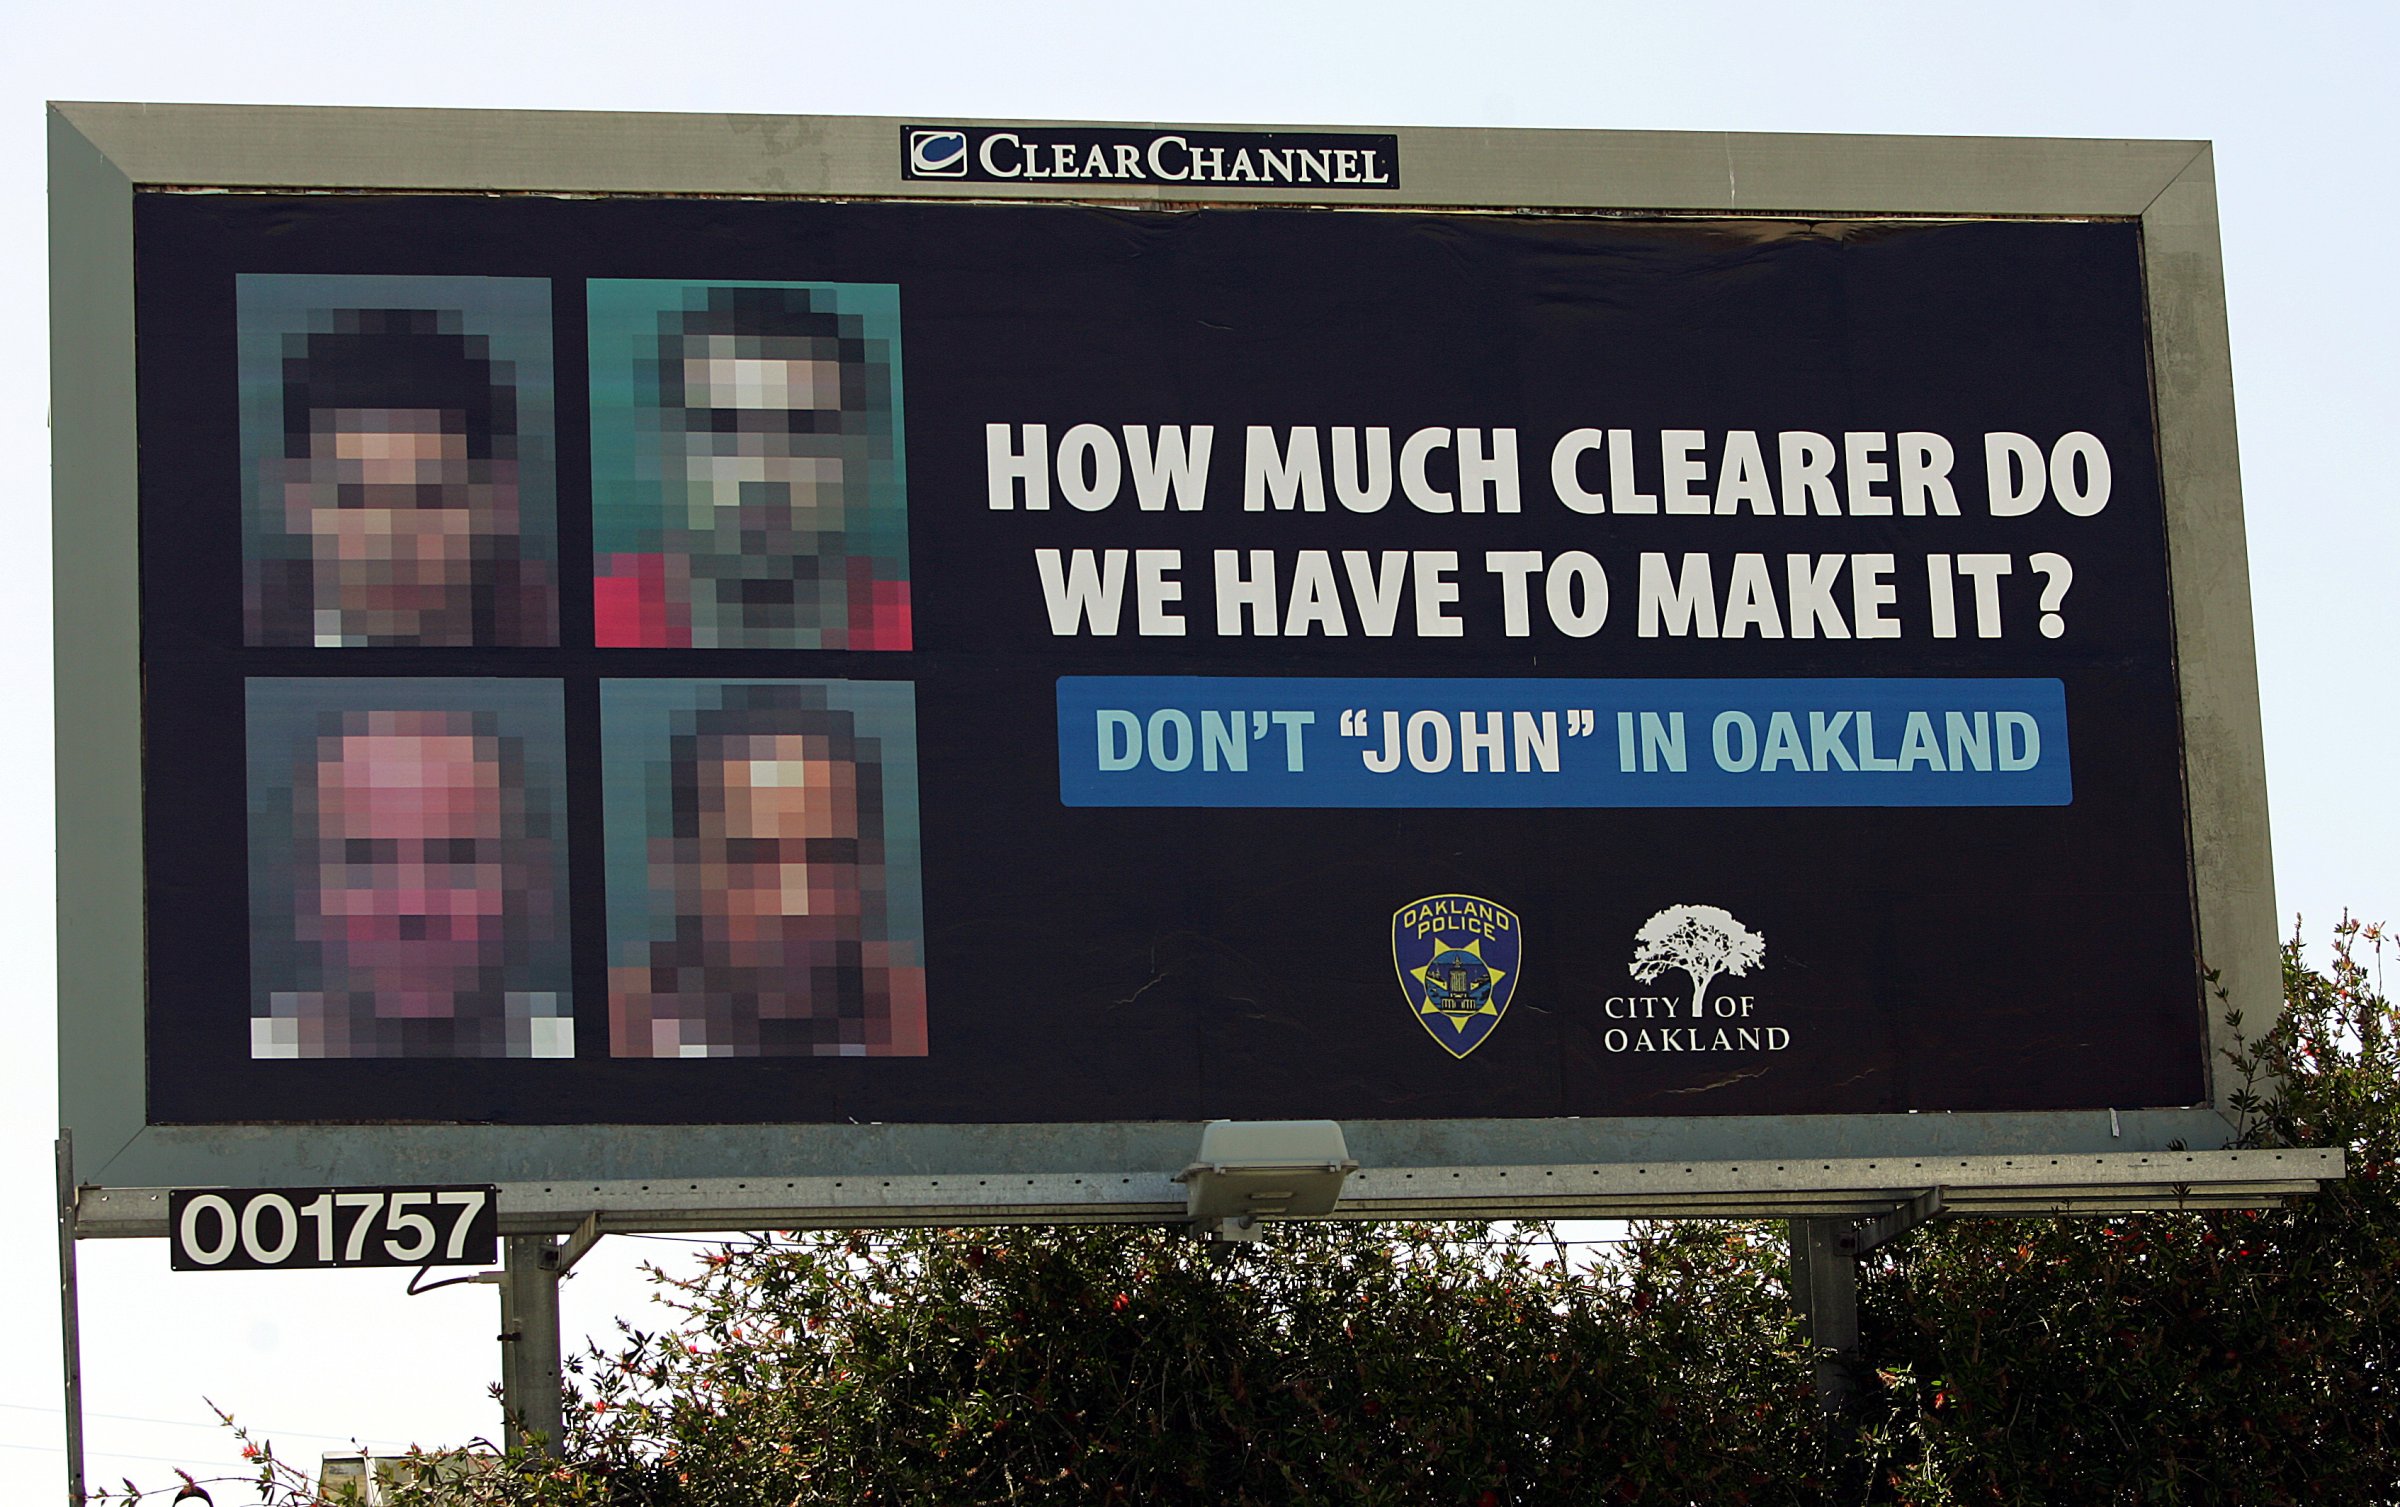 Images of four men convicted of soliciting prostitutes, intentionally blurred so they could not be recognized, are seen on a billboard on June 2, 2005, in Oakland, Calif.